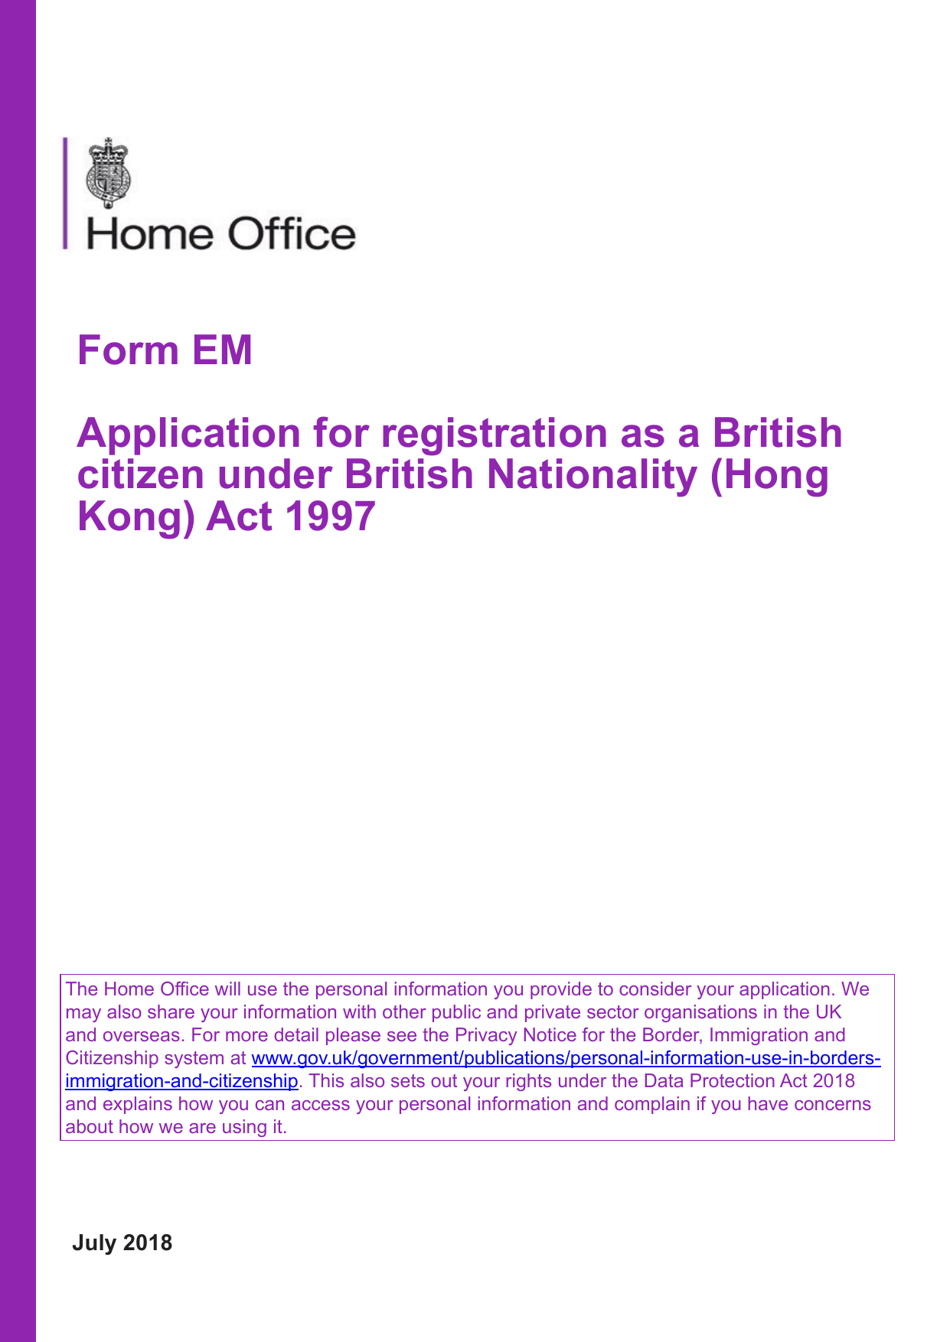 Form EM Application for Registration as a British Citizen Under British Nationality (Hong Kong) Act 1997 - United Kingdom, Page 1